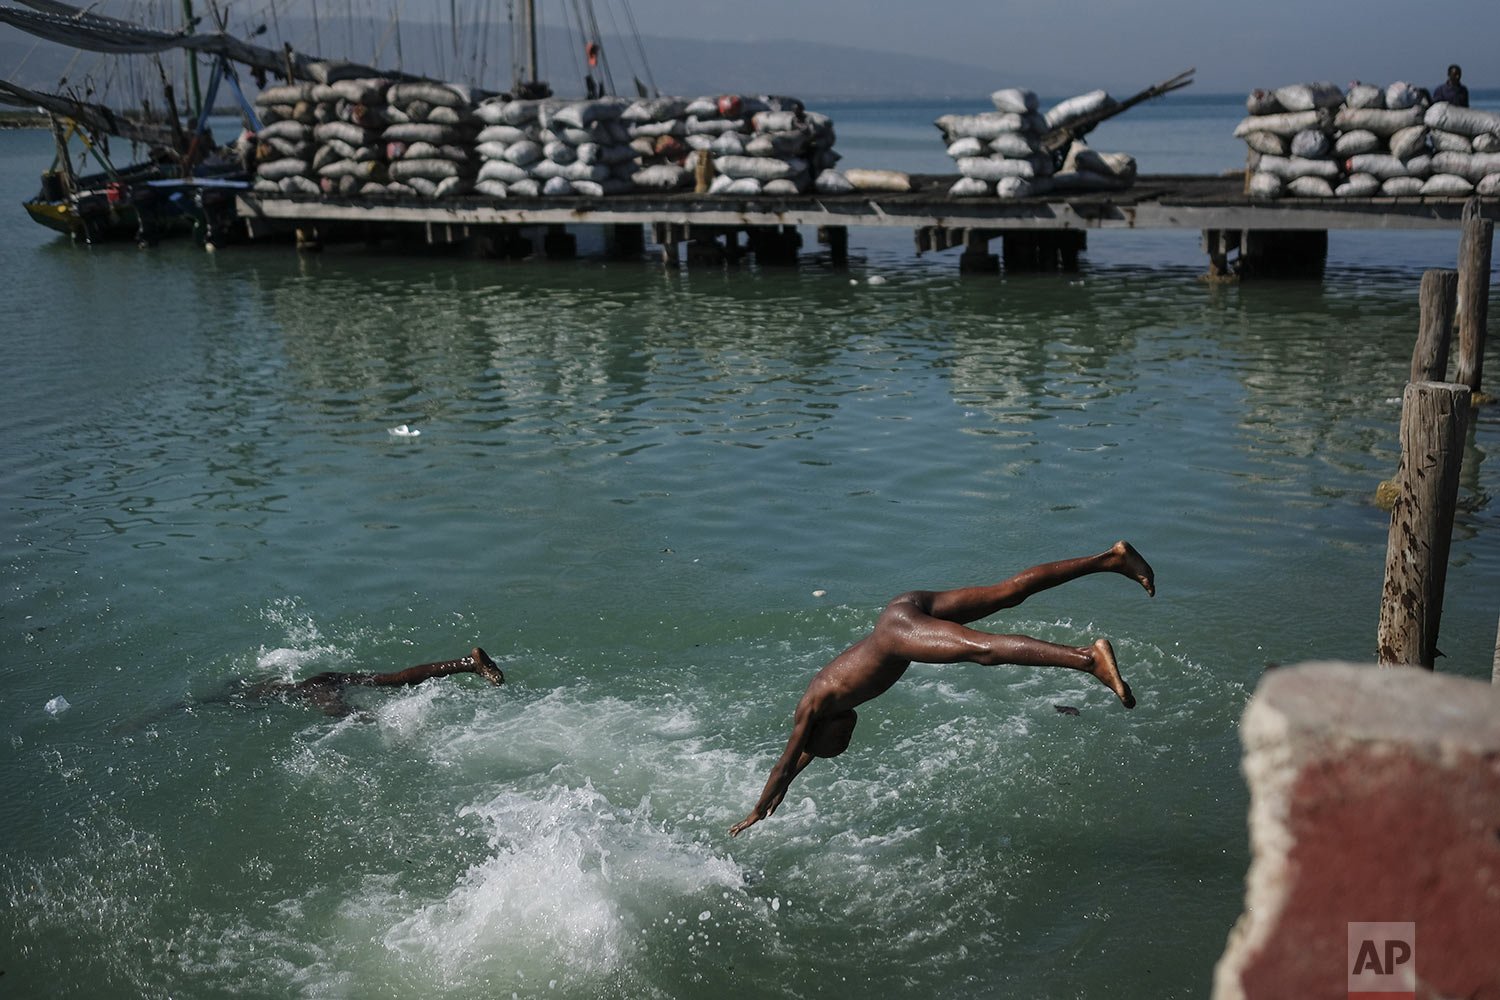  Youths jump into the sea off the shore in the Cite Soleil neighborhood of Port-au-Prince, Haiti, Nov. 16, 2021. (AP Photo/Matias Delacroix) 